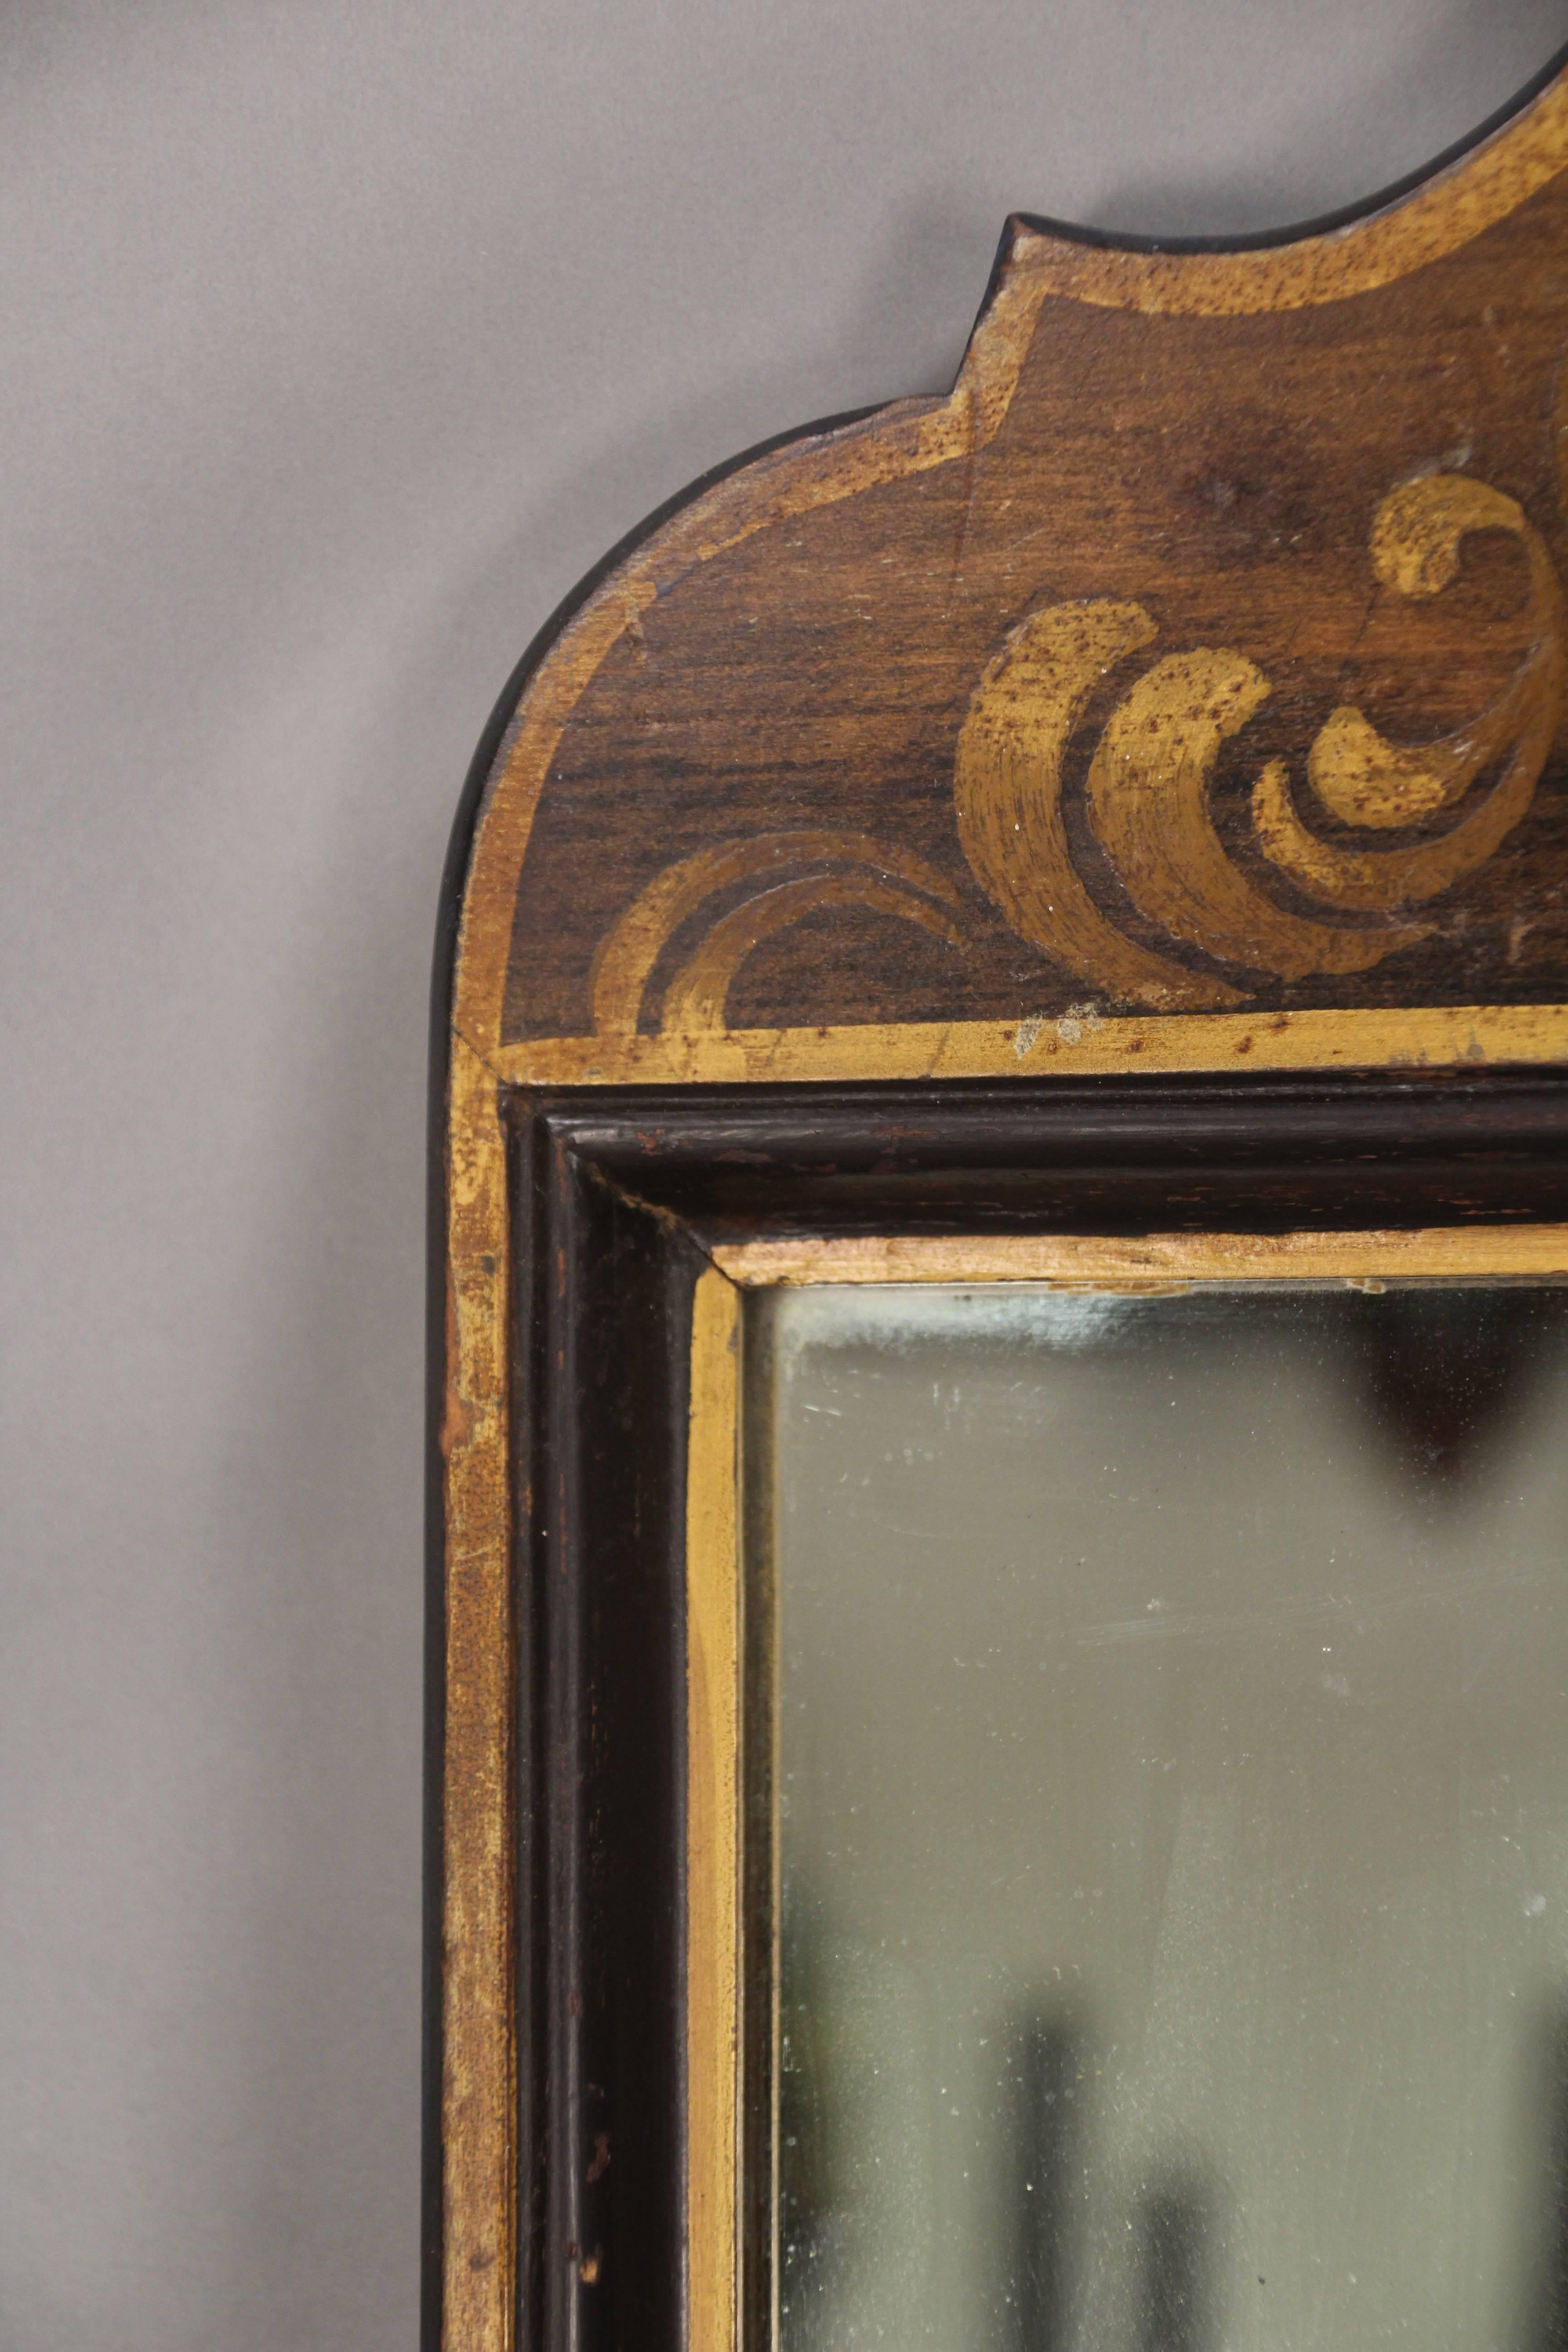 North American Small 1920s Hand-Painted Spanish Revival Mirror